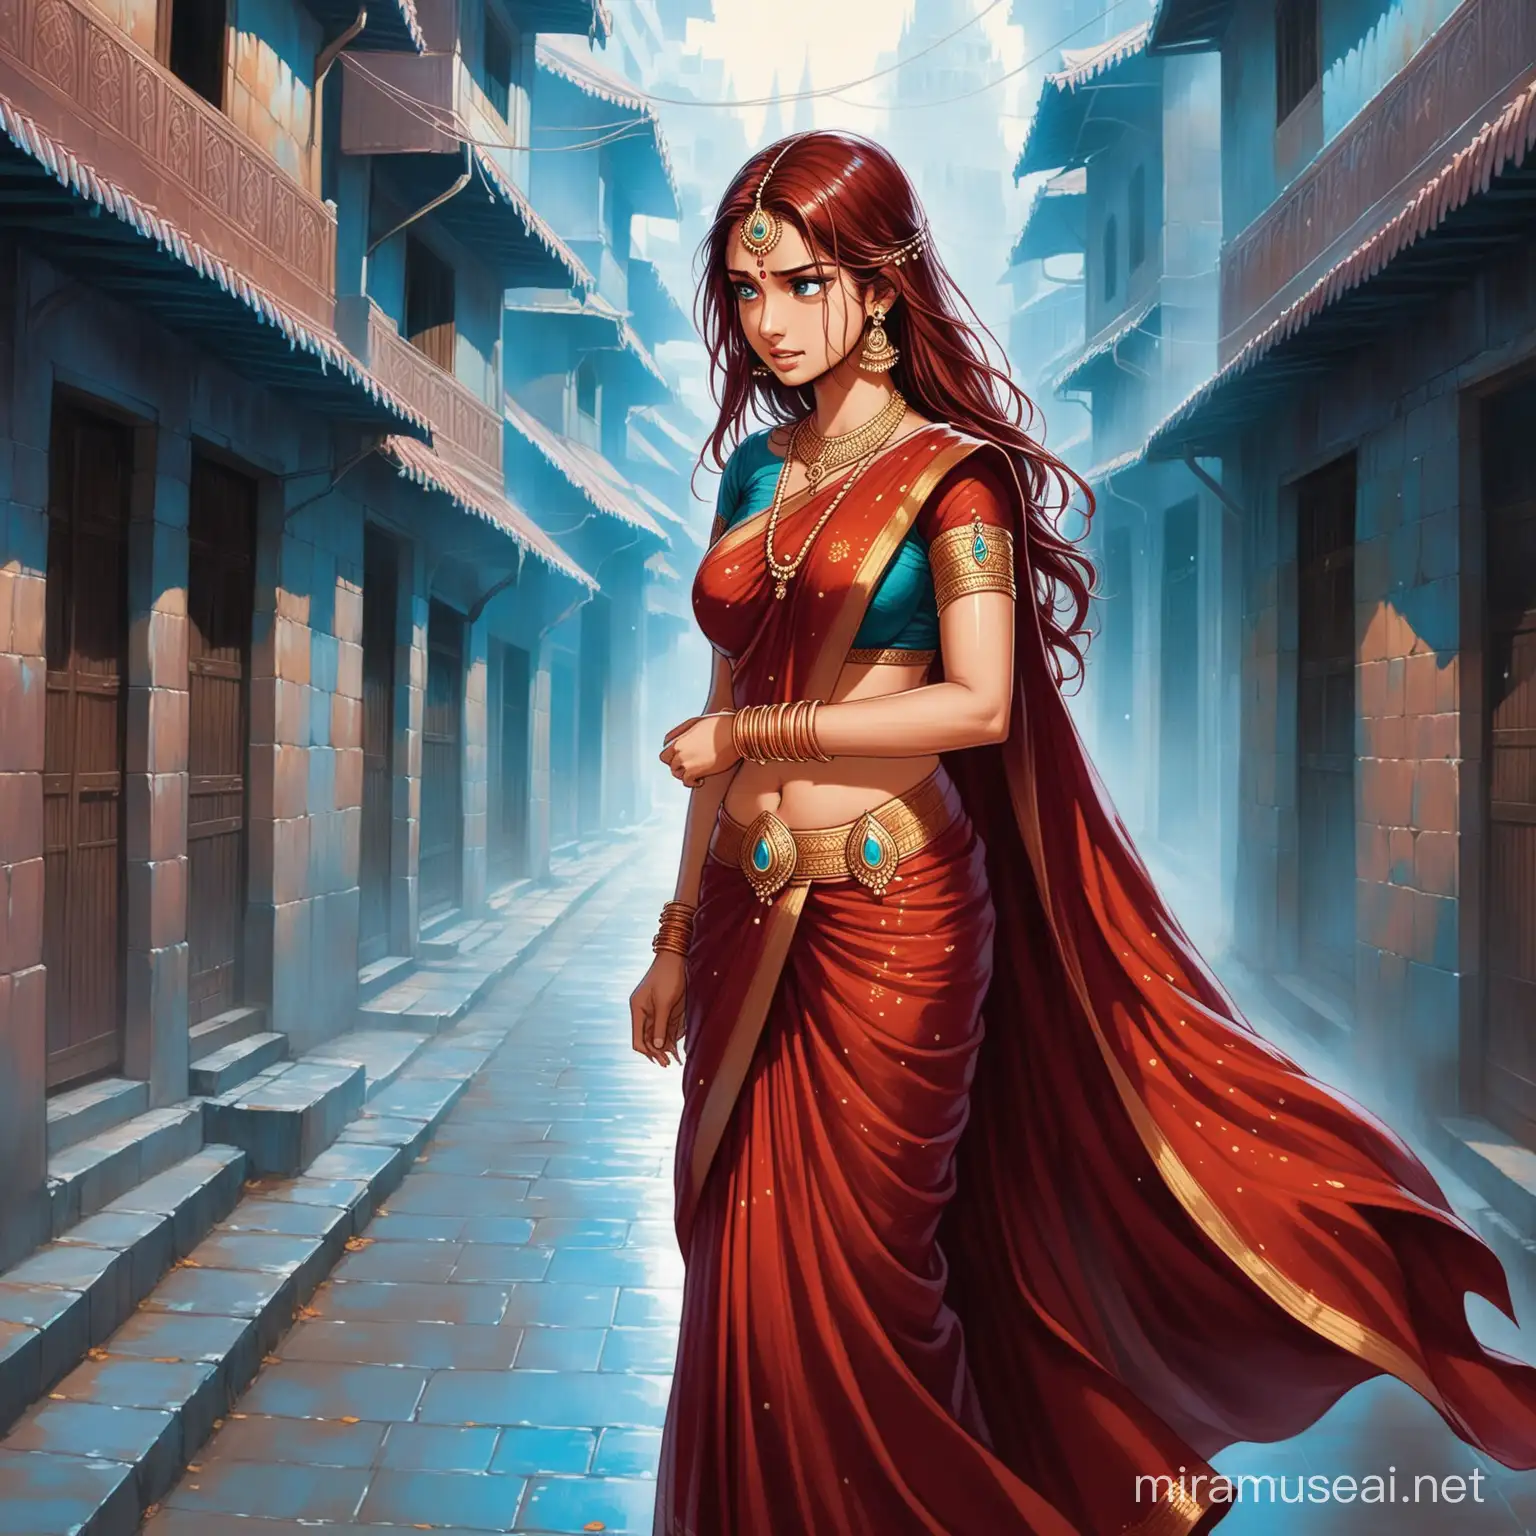 South Indian Goddess in Red Sari with Auburn Hair and Selune Symbol